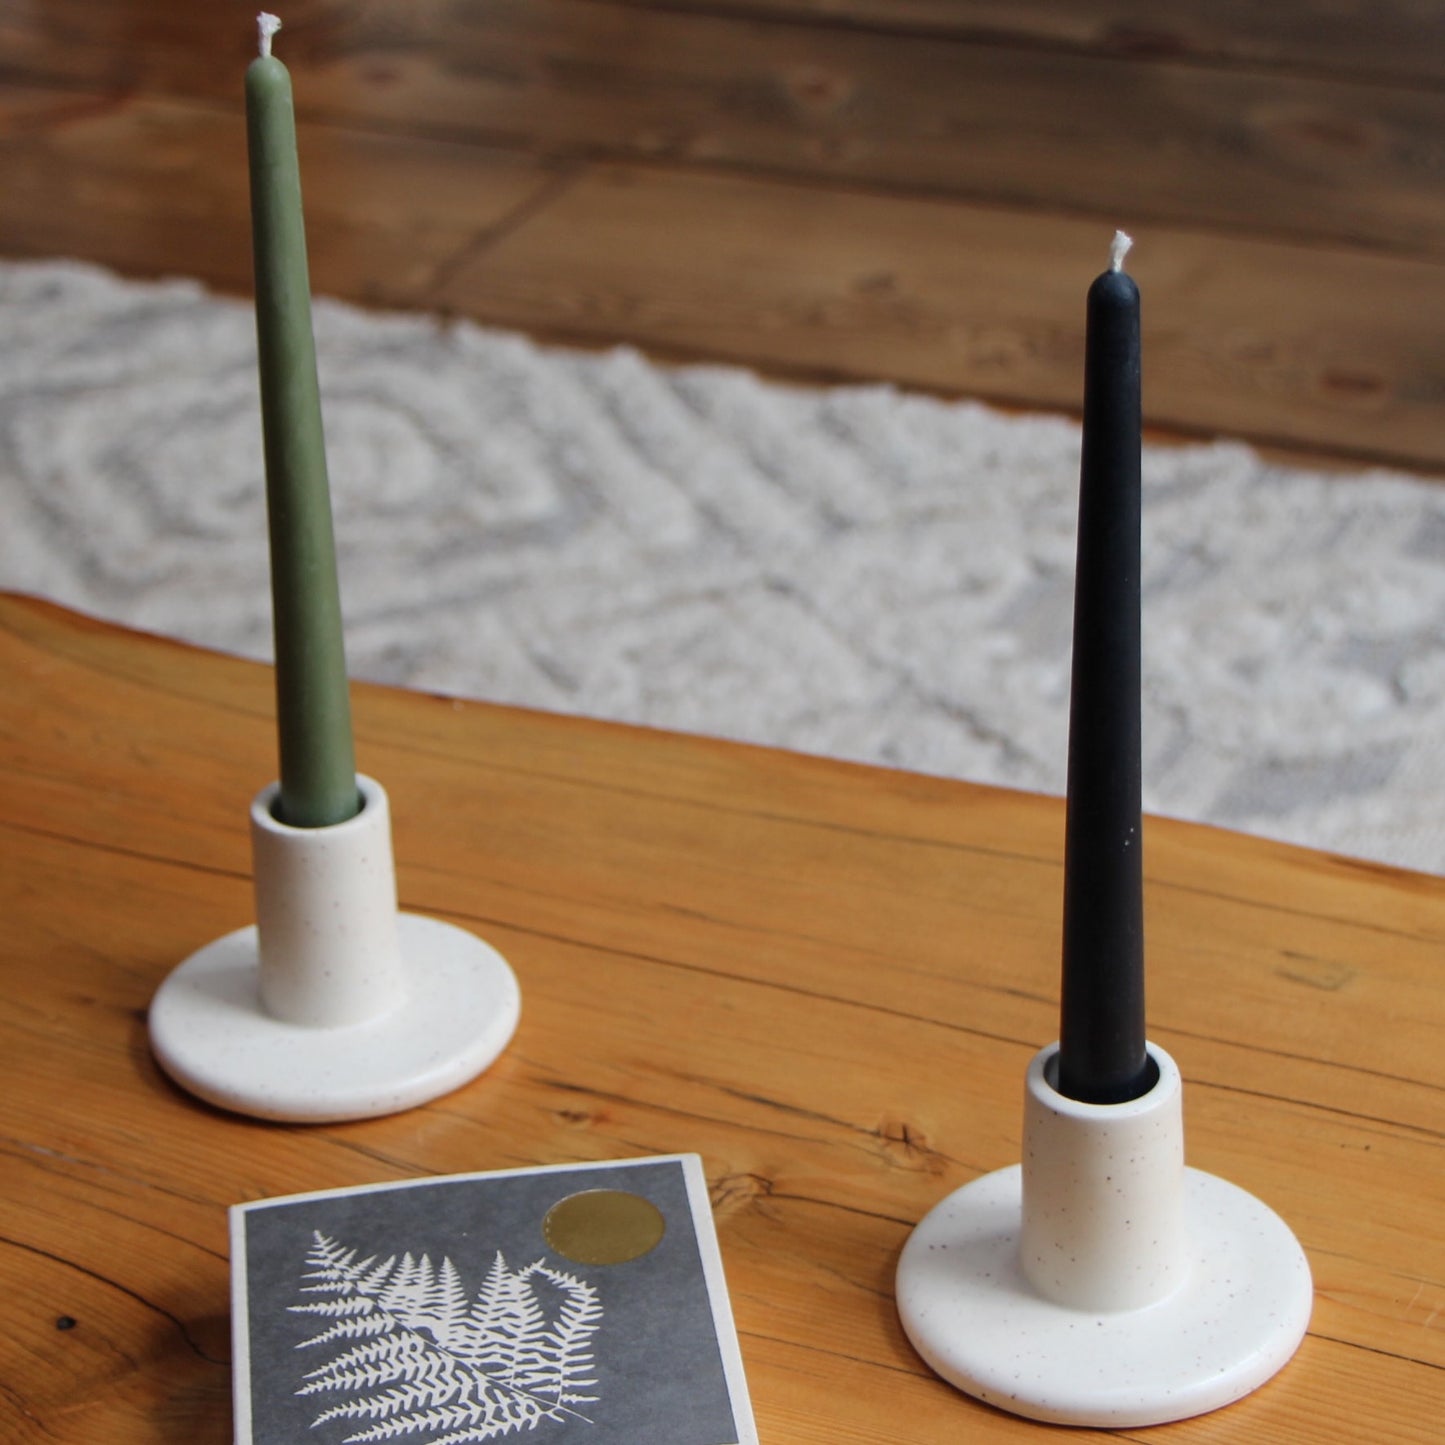 10-inch tall smooth taper candles made with locally-sourced beeswax, cotton wicks, and natural dye shown in ceramic candlesticks